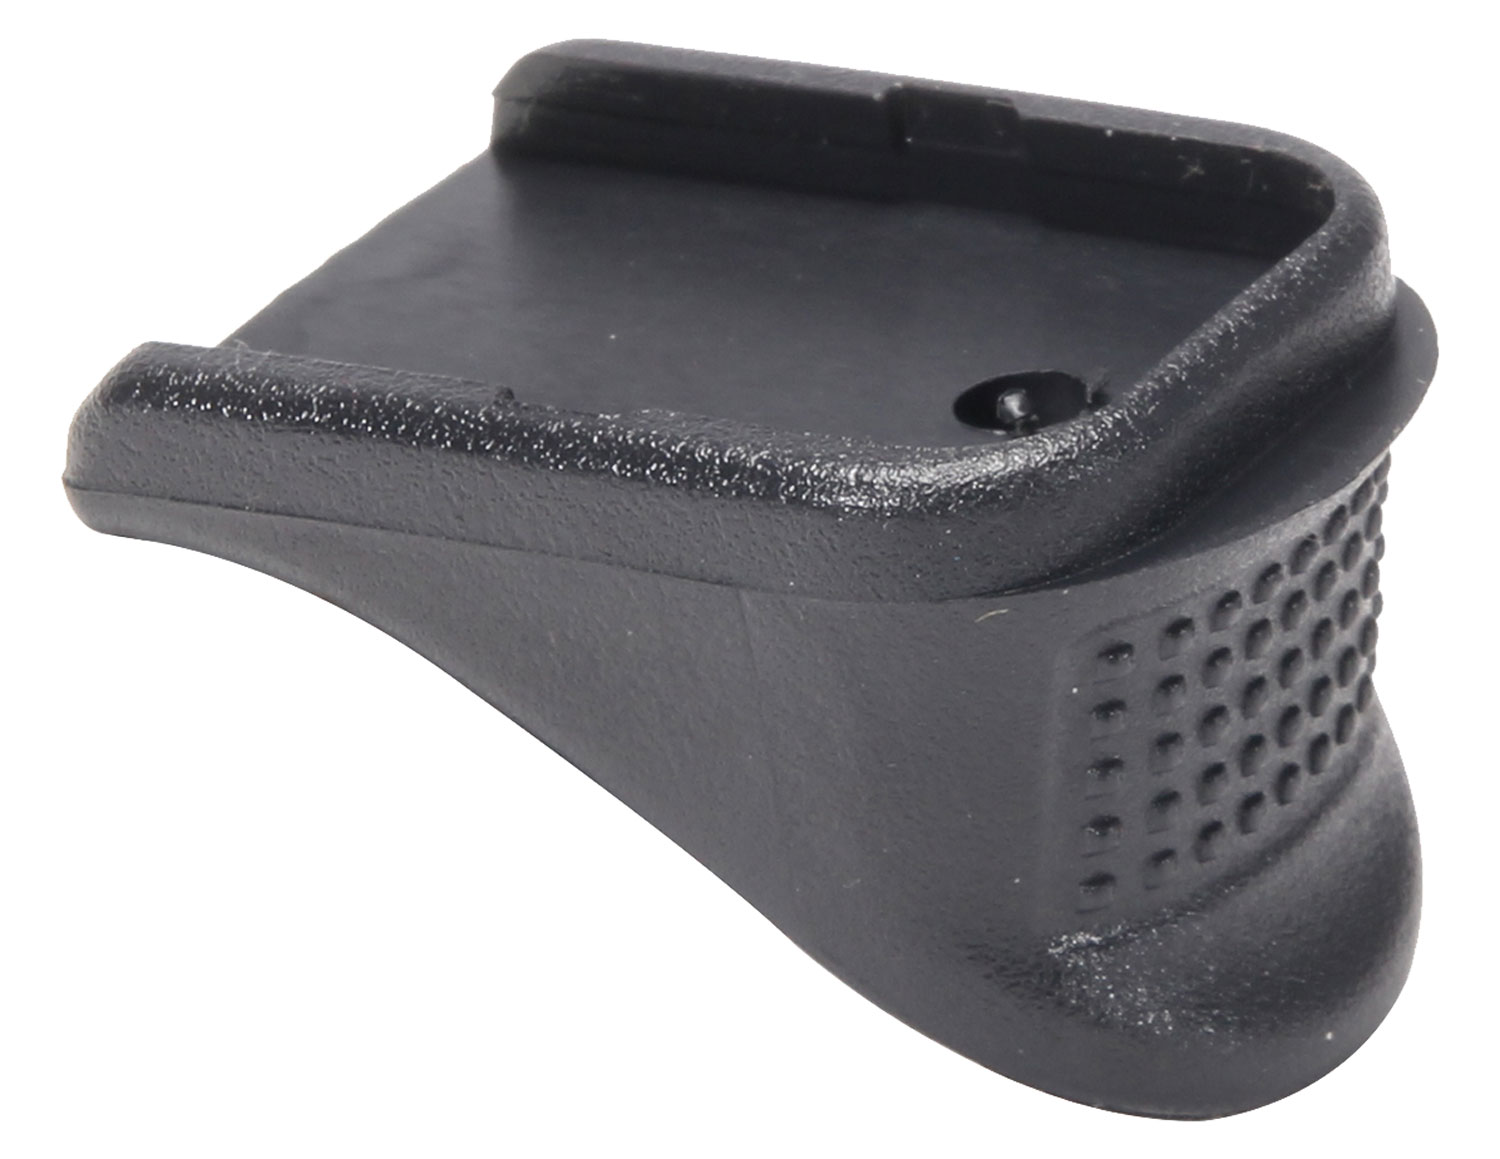 PACHMAYR GRIP EXTENDER FOR GLOCK 26/27/33/39 ADDS 1/4